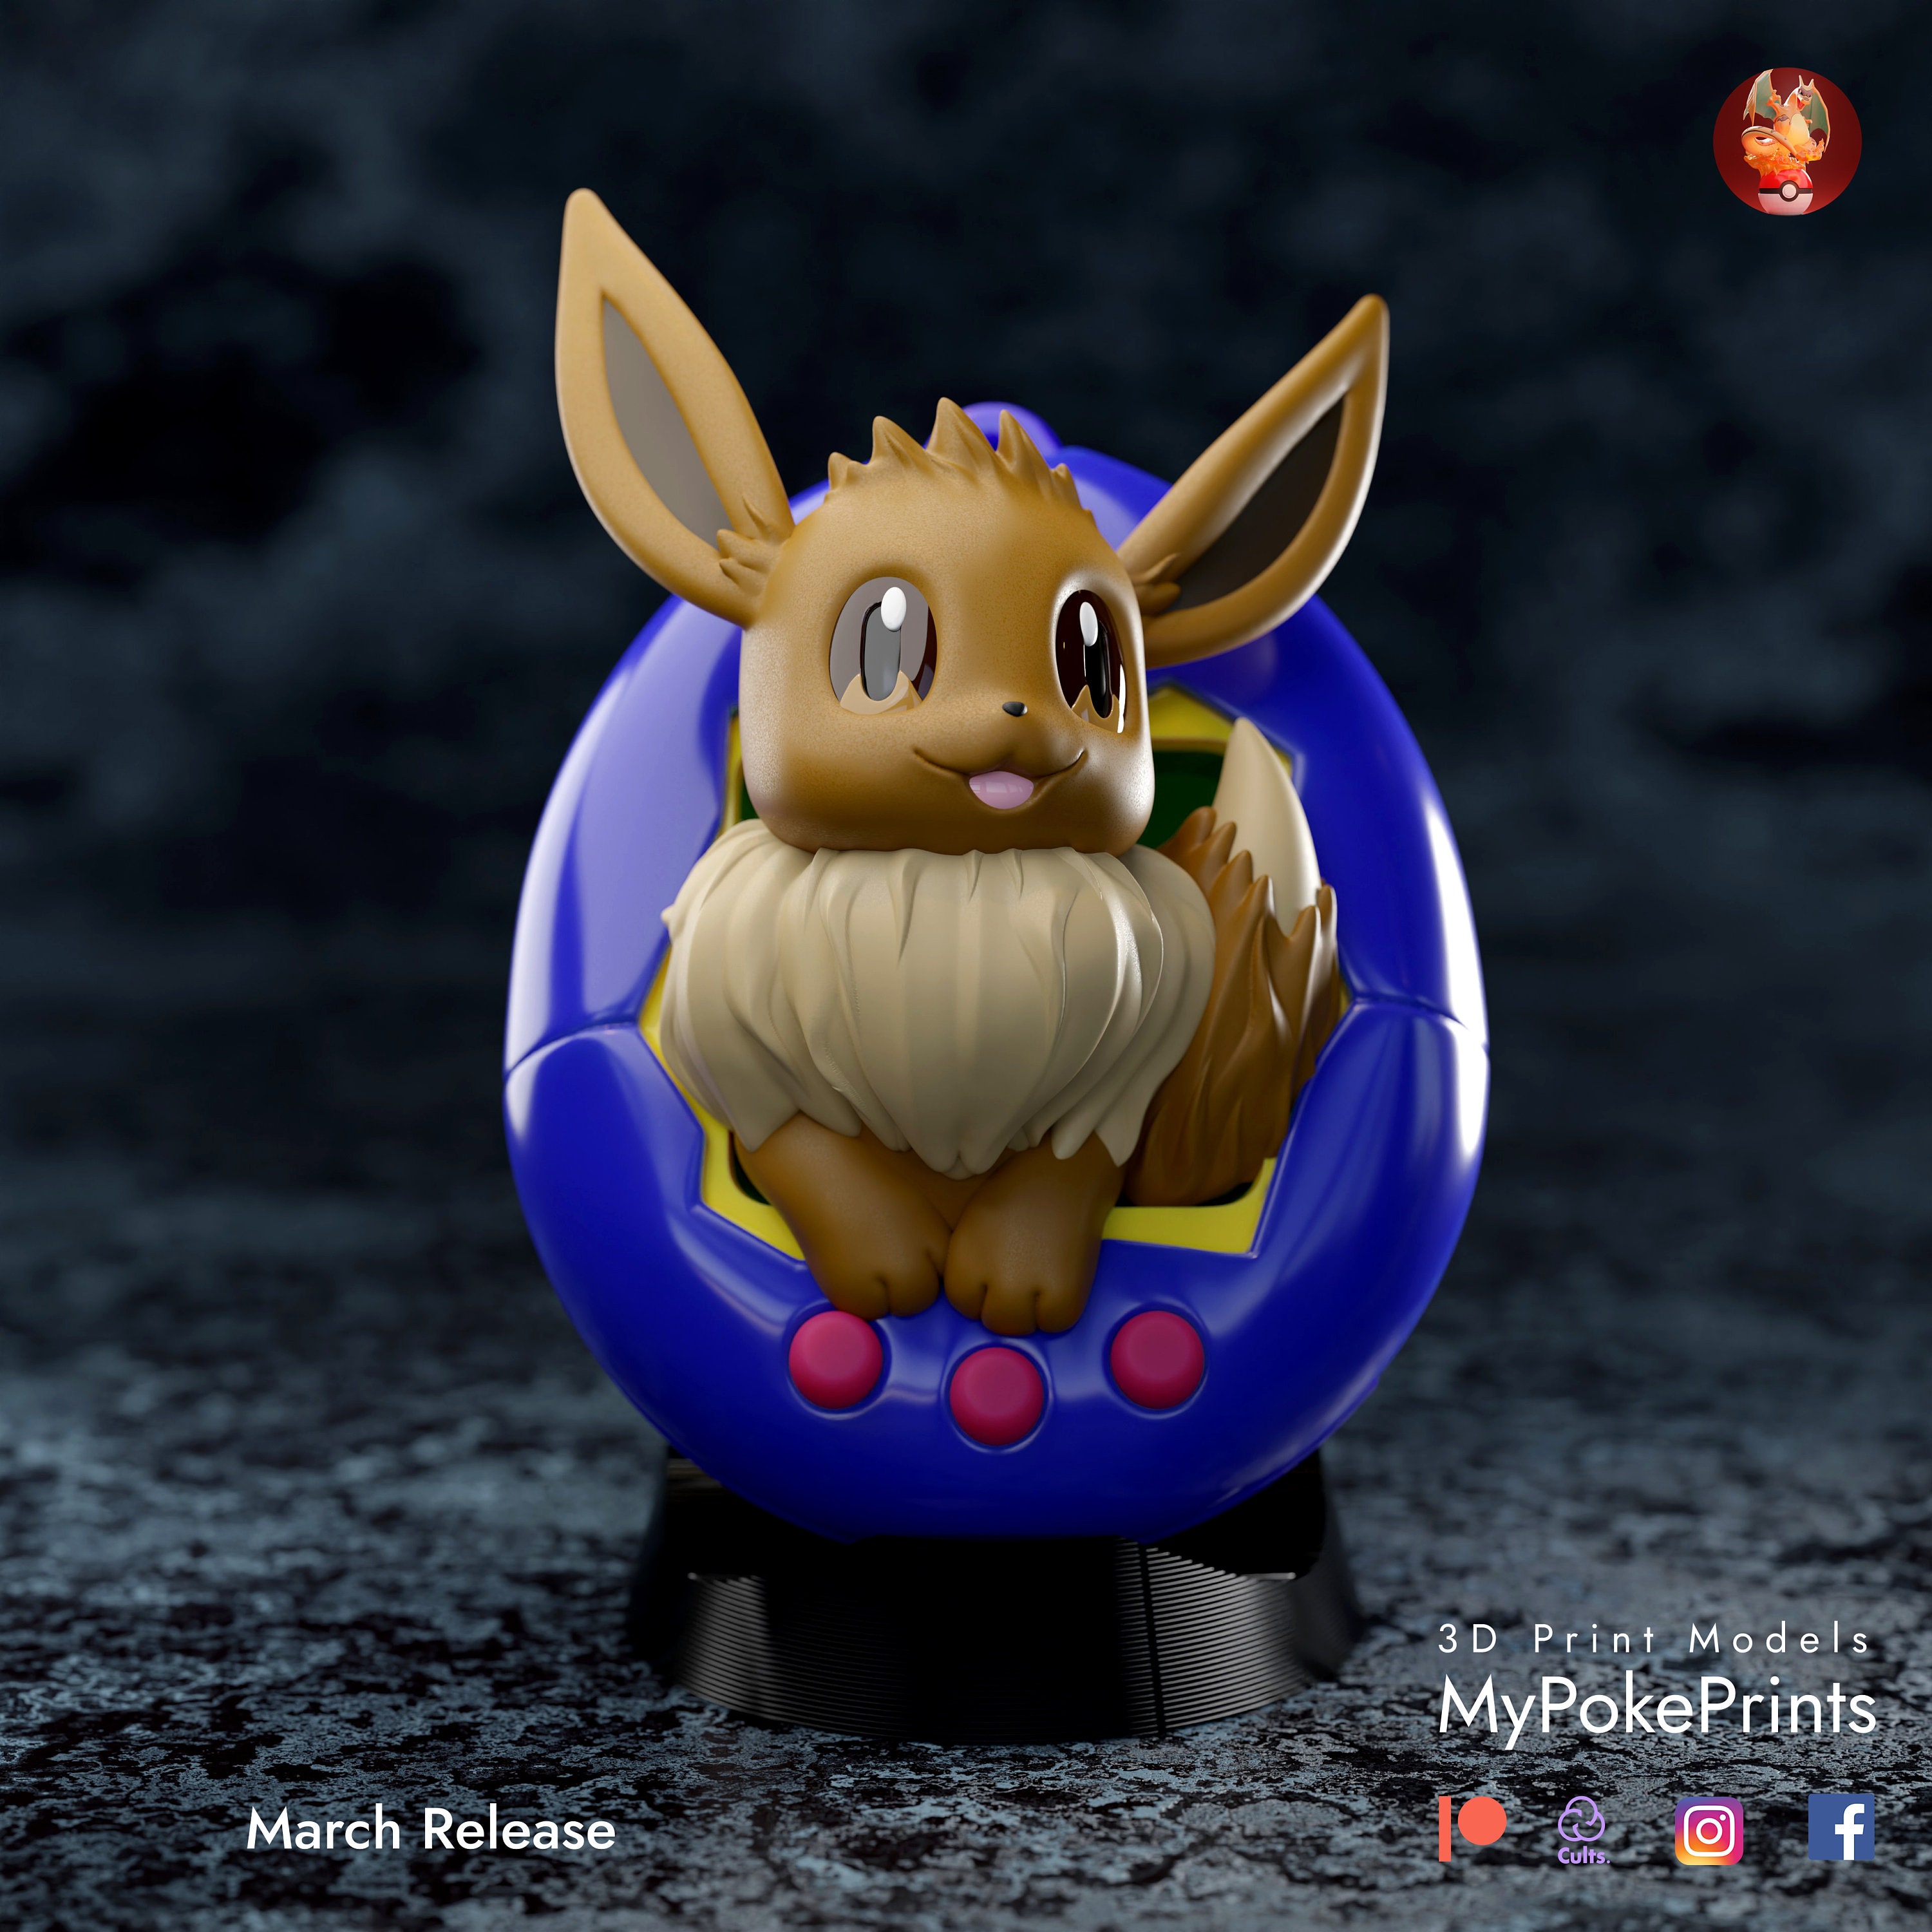 Pokemon Tamagotchi Eevee Ornamental Statue Collectible 3d Printed Statues  Home Decor Unpainted and Painted Versions Available 